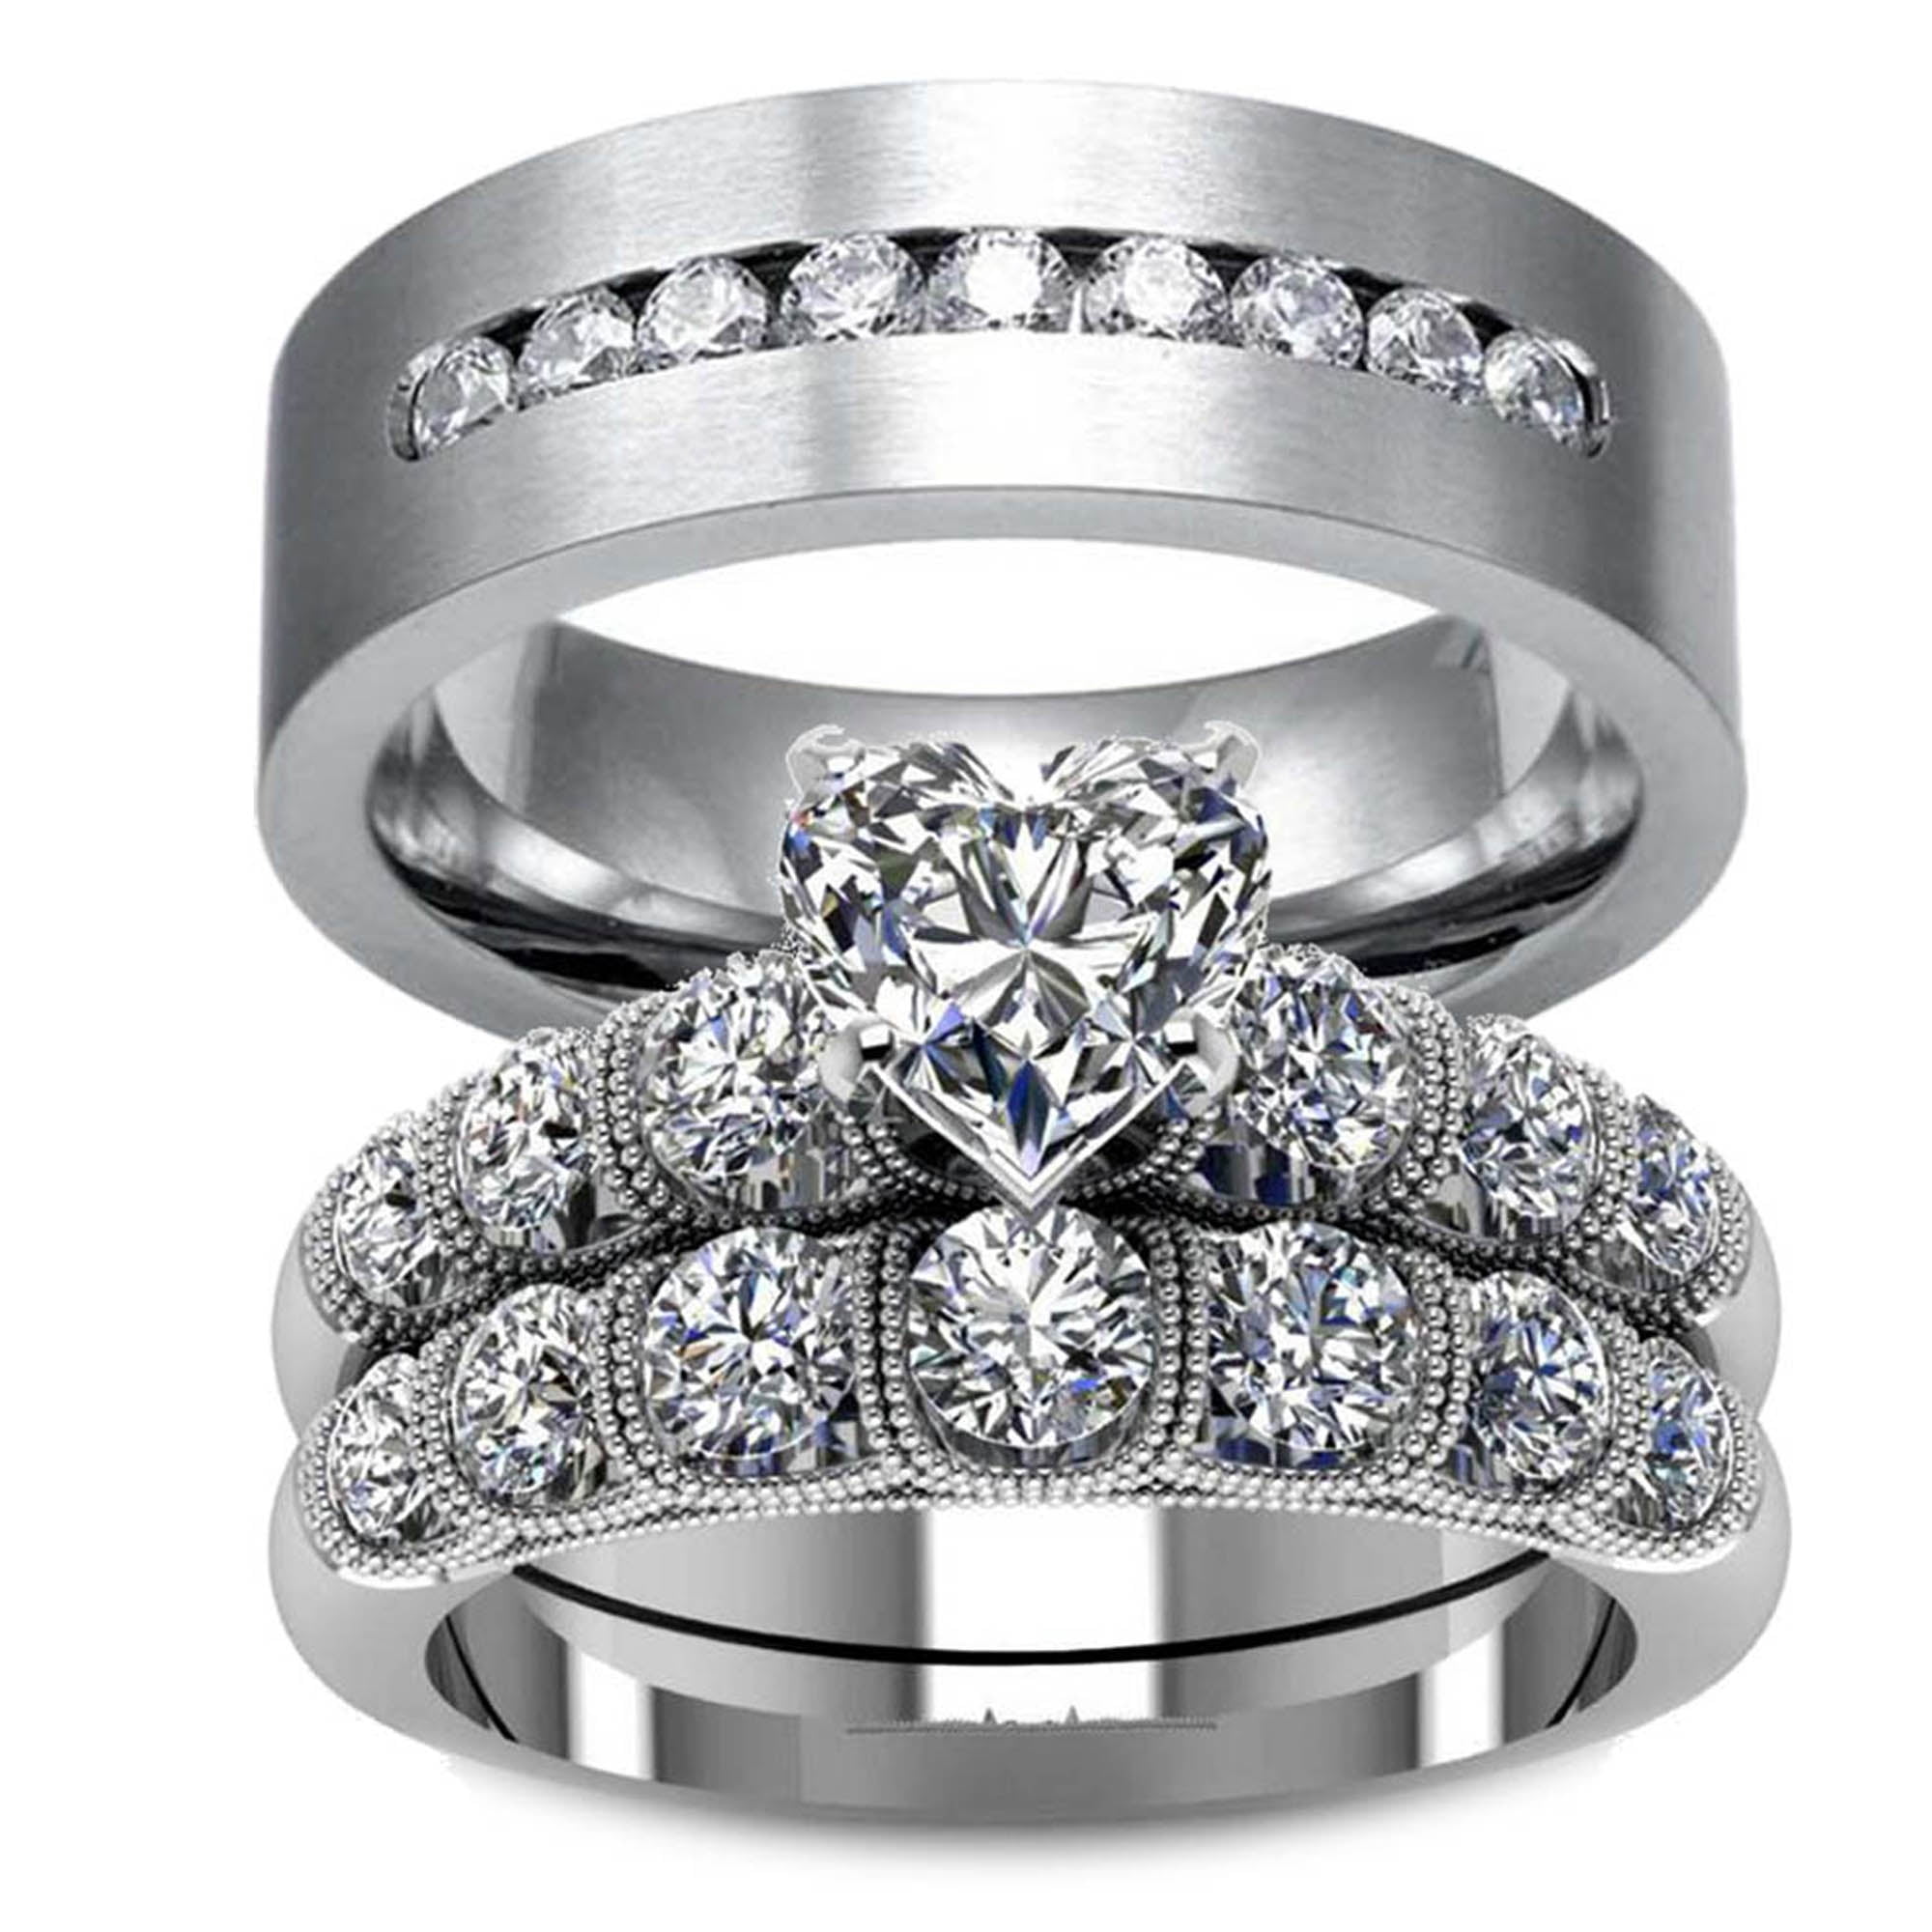 Two Rings His and Hers Wedding Ring Sets Couples Rings 10kt White Gold ...